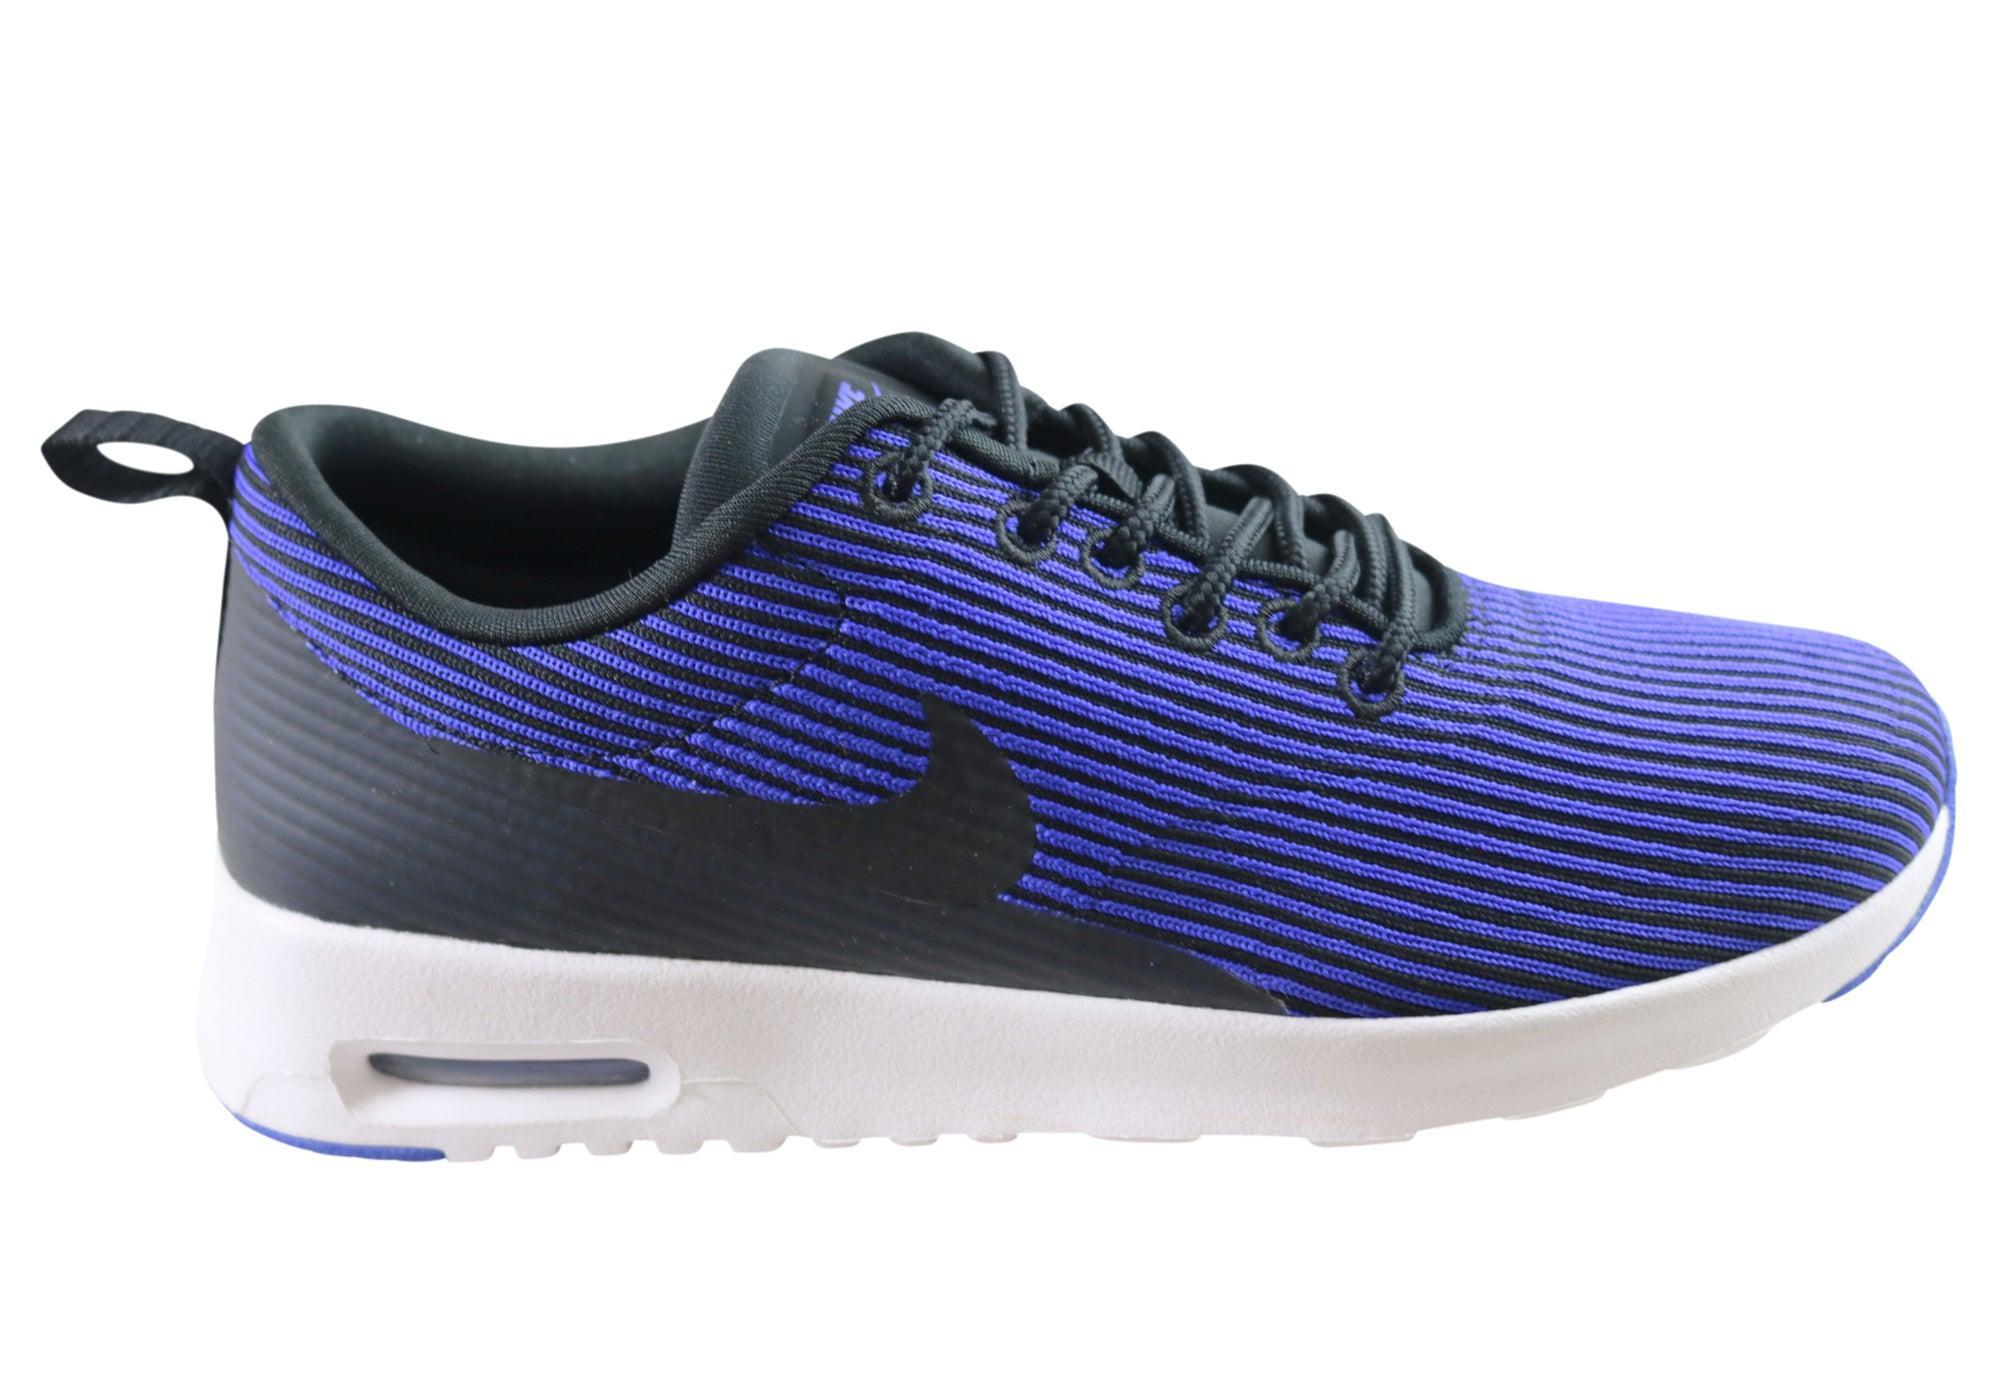 Nike Womens AirMax KJCRD Comfortable Lace Up Shoes